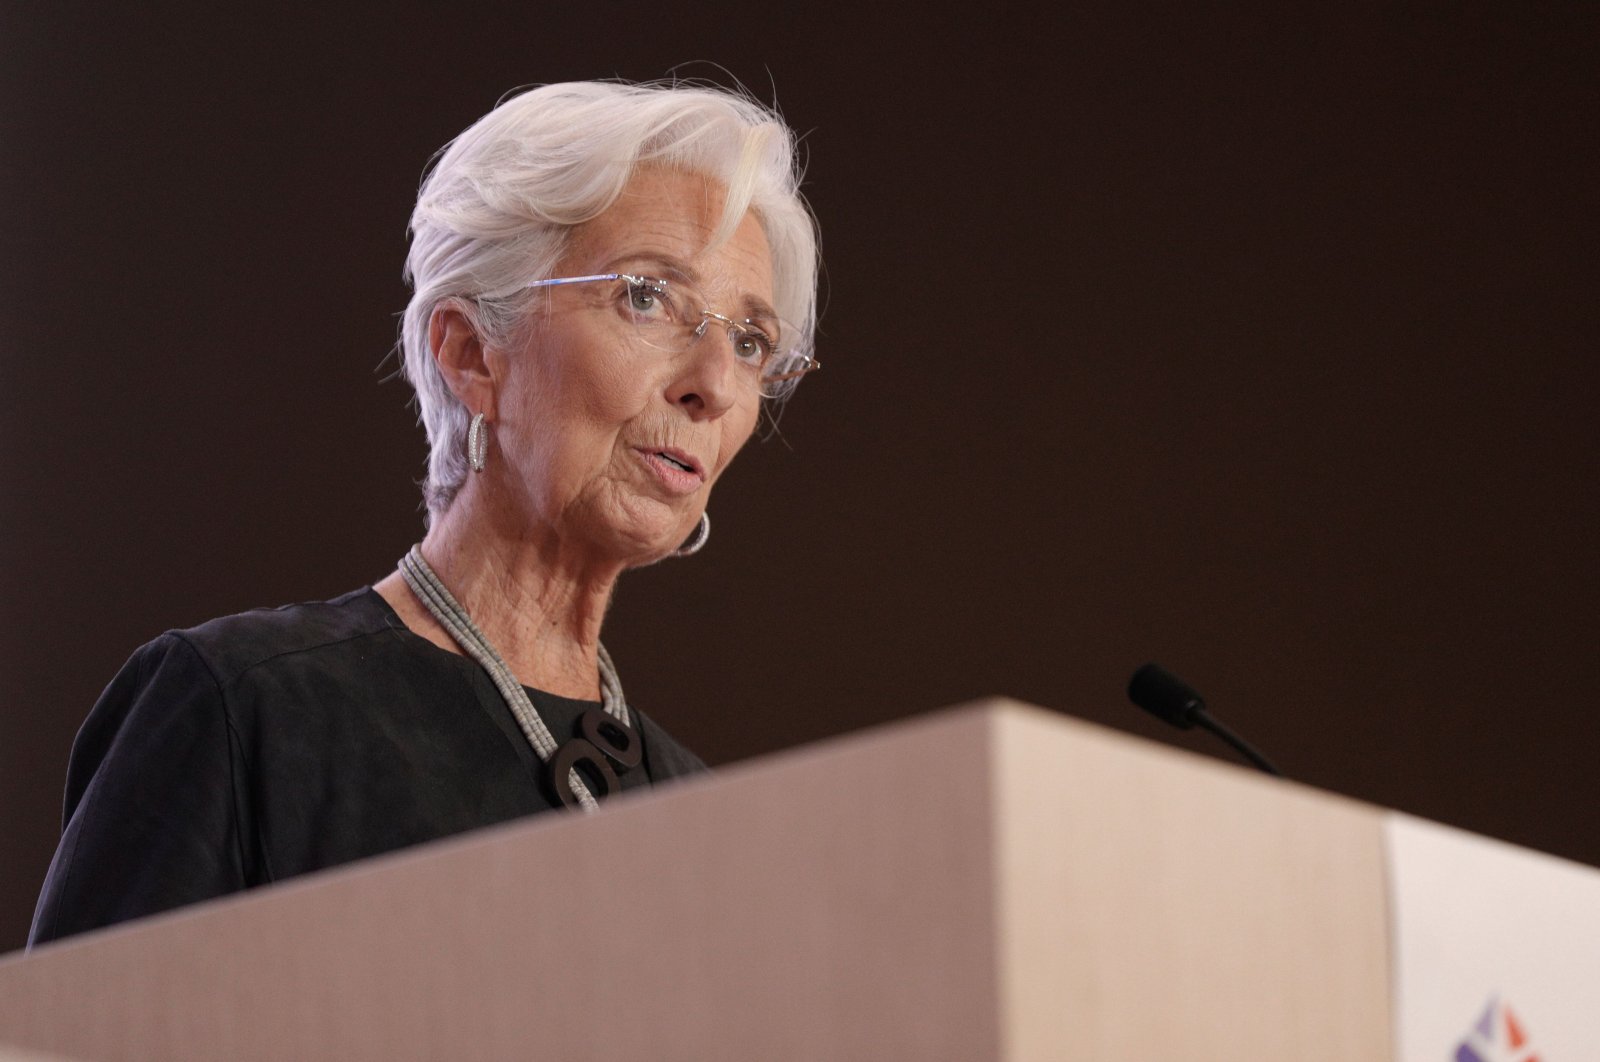 European Central Bank (ECB) President Christine Lagarde speaks during the 16th Congress of Regions (Congres des Regions) in Saint-Ouen, north of Paris, Oct. 19, 2020. (AFP Photo)